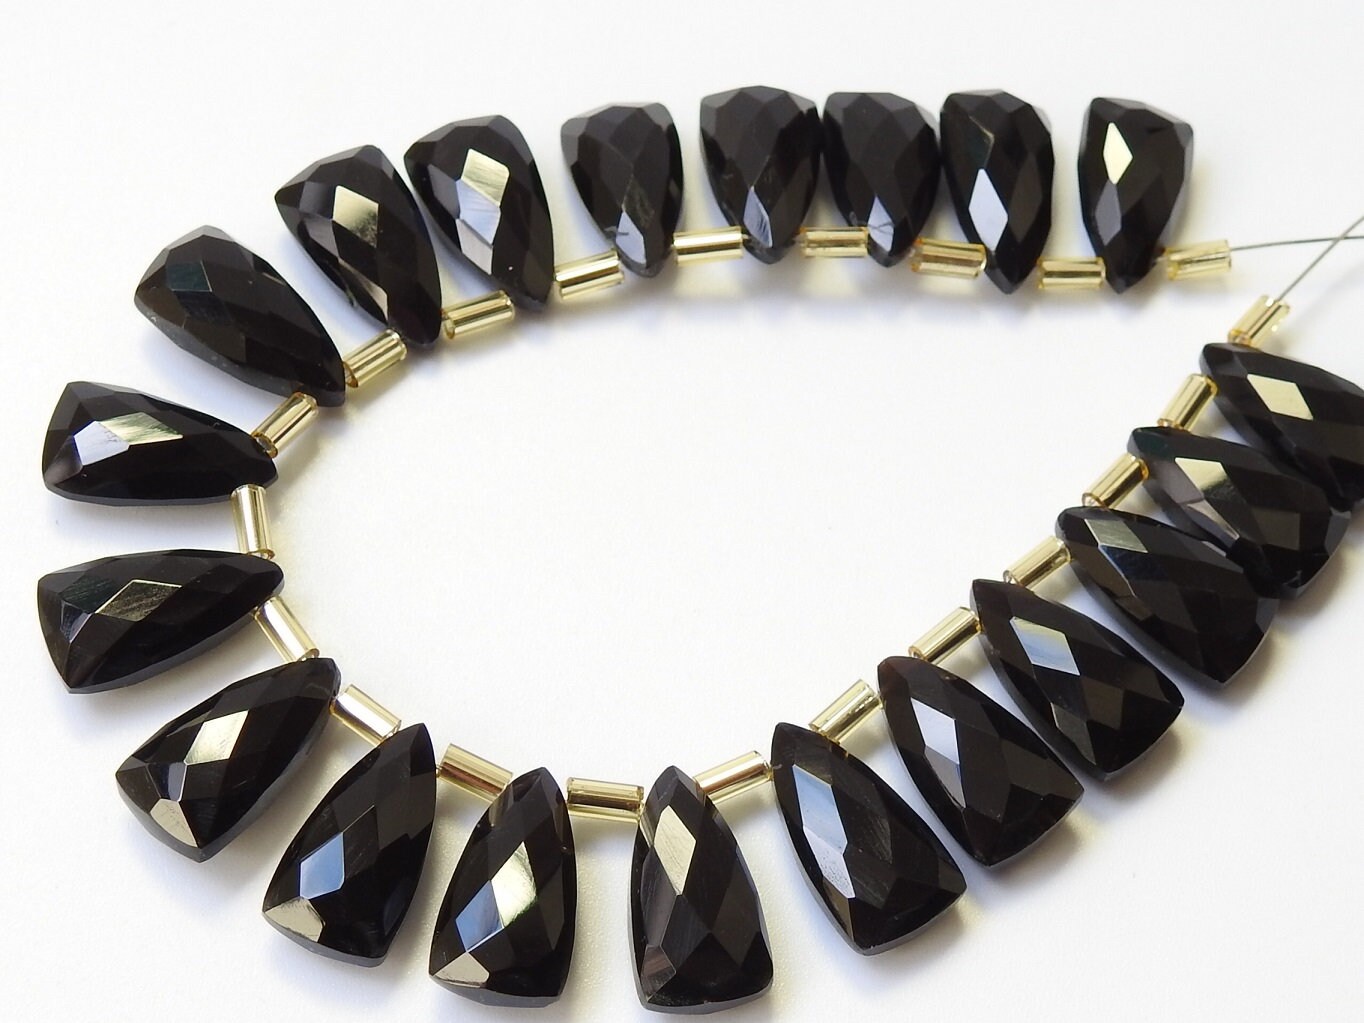 Black Onyx Long Triangle,Trillion,Pyramid,Teardrop,Drop,Briolettes,Faceted,Earrings Pair,Wholesale Price,New Arrival 15X8MM Approx PME-CY2 | Save 33% - Rajasthan Living 14